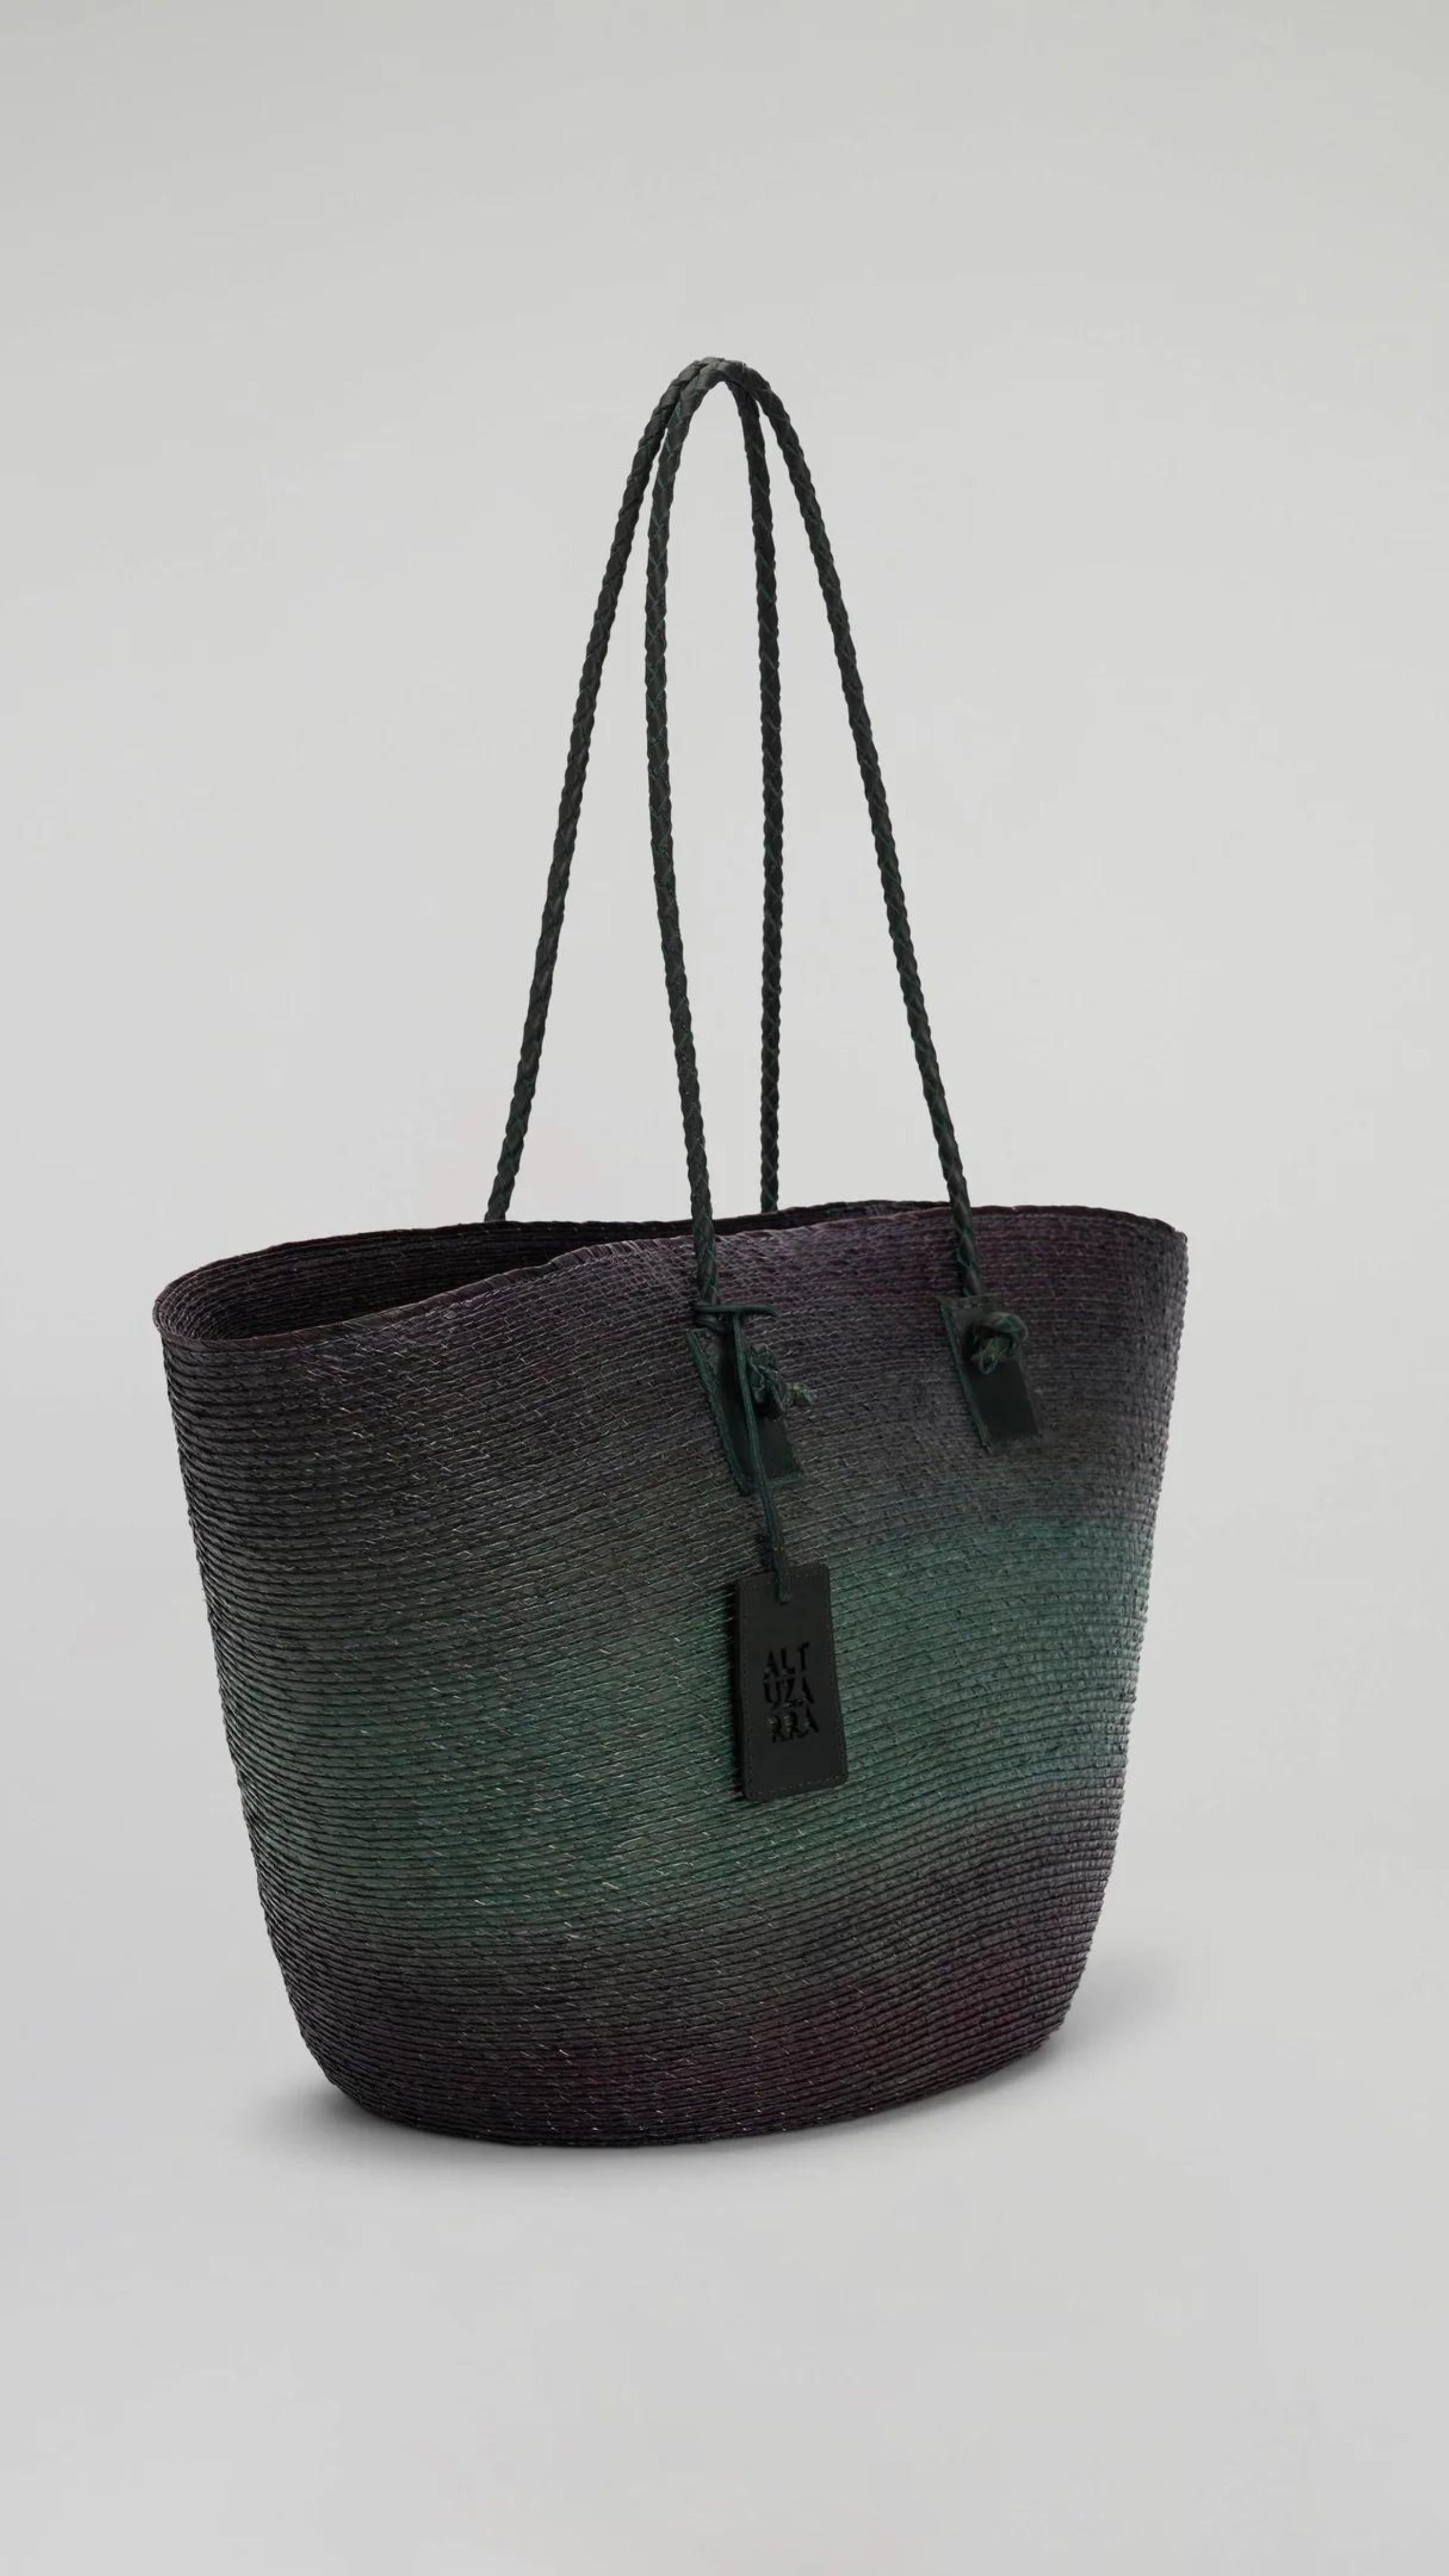 Altruzarra Large Watermill Bag in Campo. A summer raffia tote bag handmade in Mexico. It has a ombre tone with black and green. With a braided leather strap and black leather details. This photo shows the bag from the front side view. Available at experience 27 in Madrid Spain. 